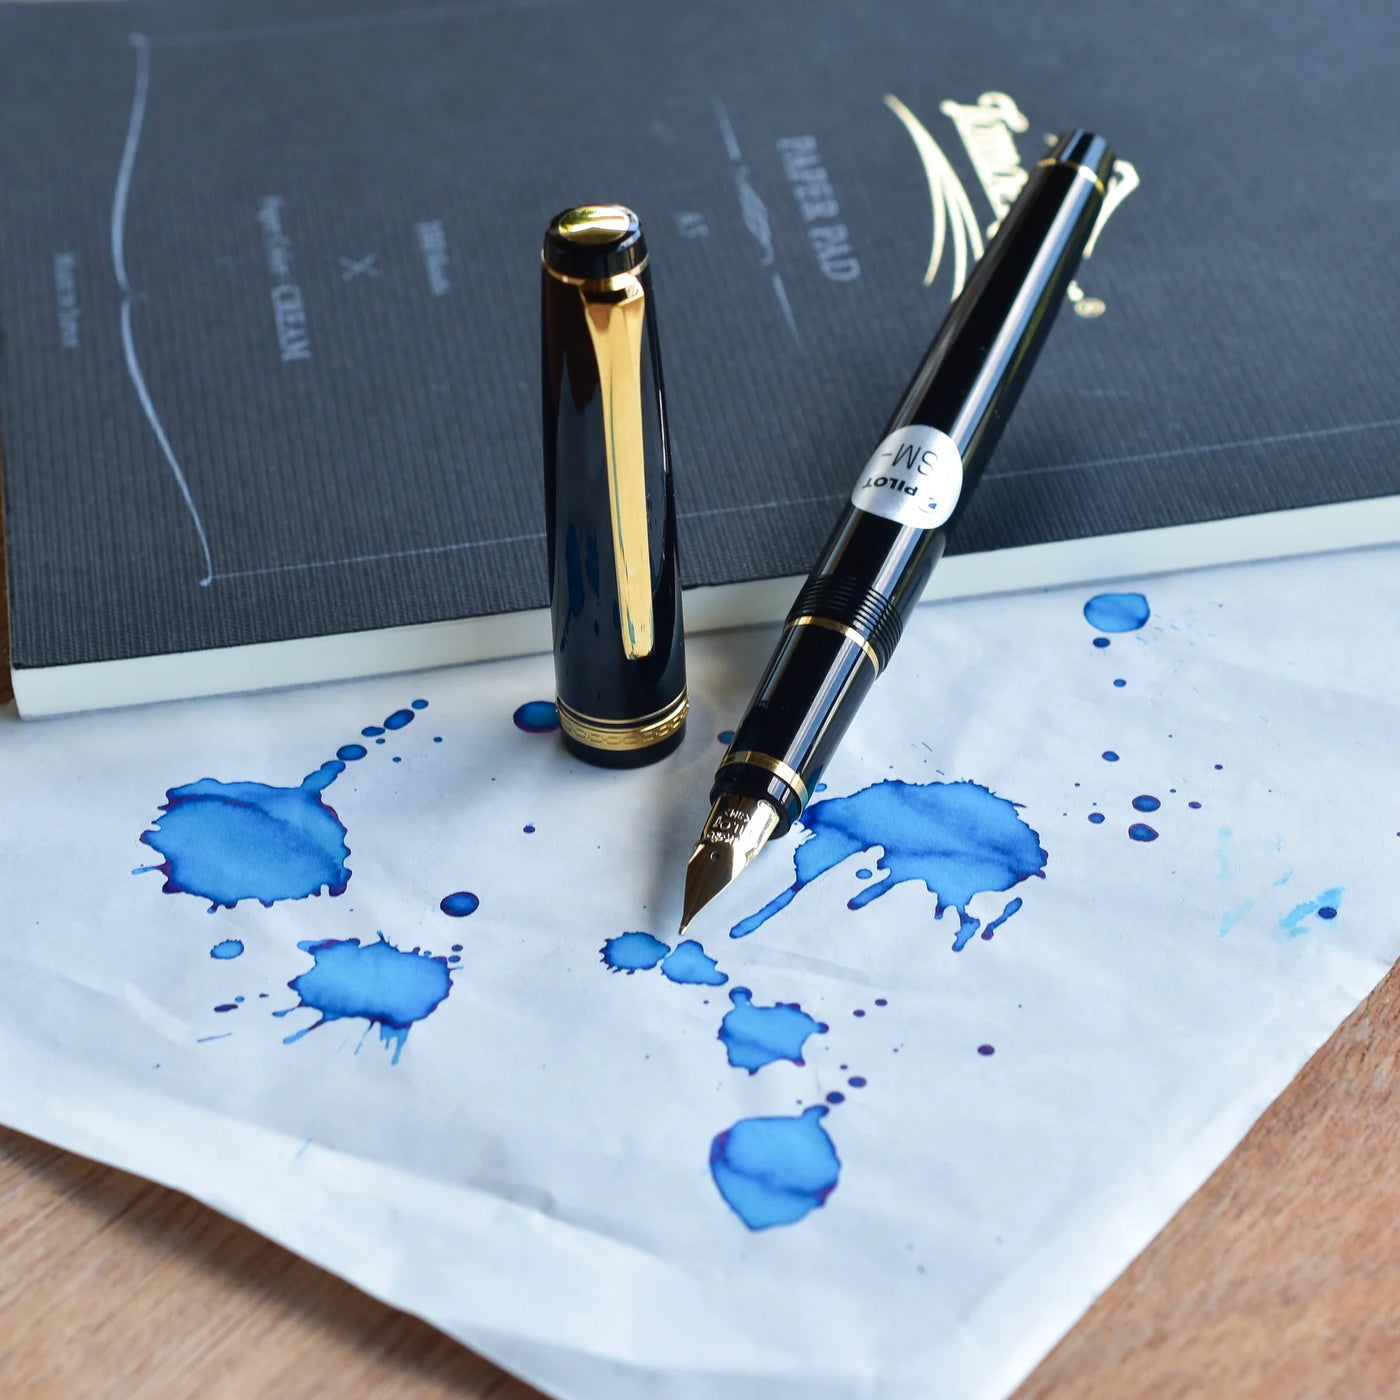 How To Write With A Fountain Pen: The 3 Simple Steps (2023) - Dayspring Pens